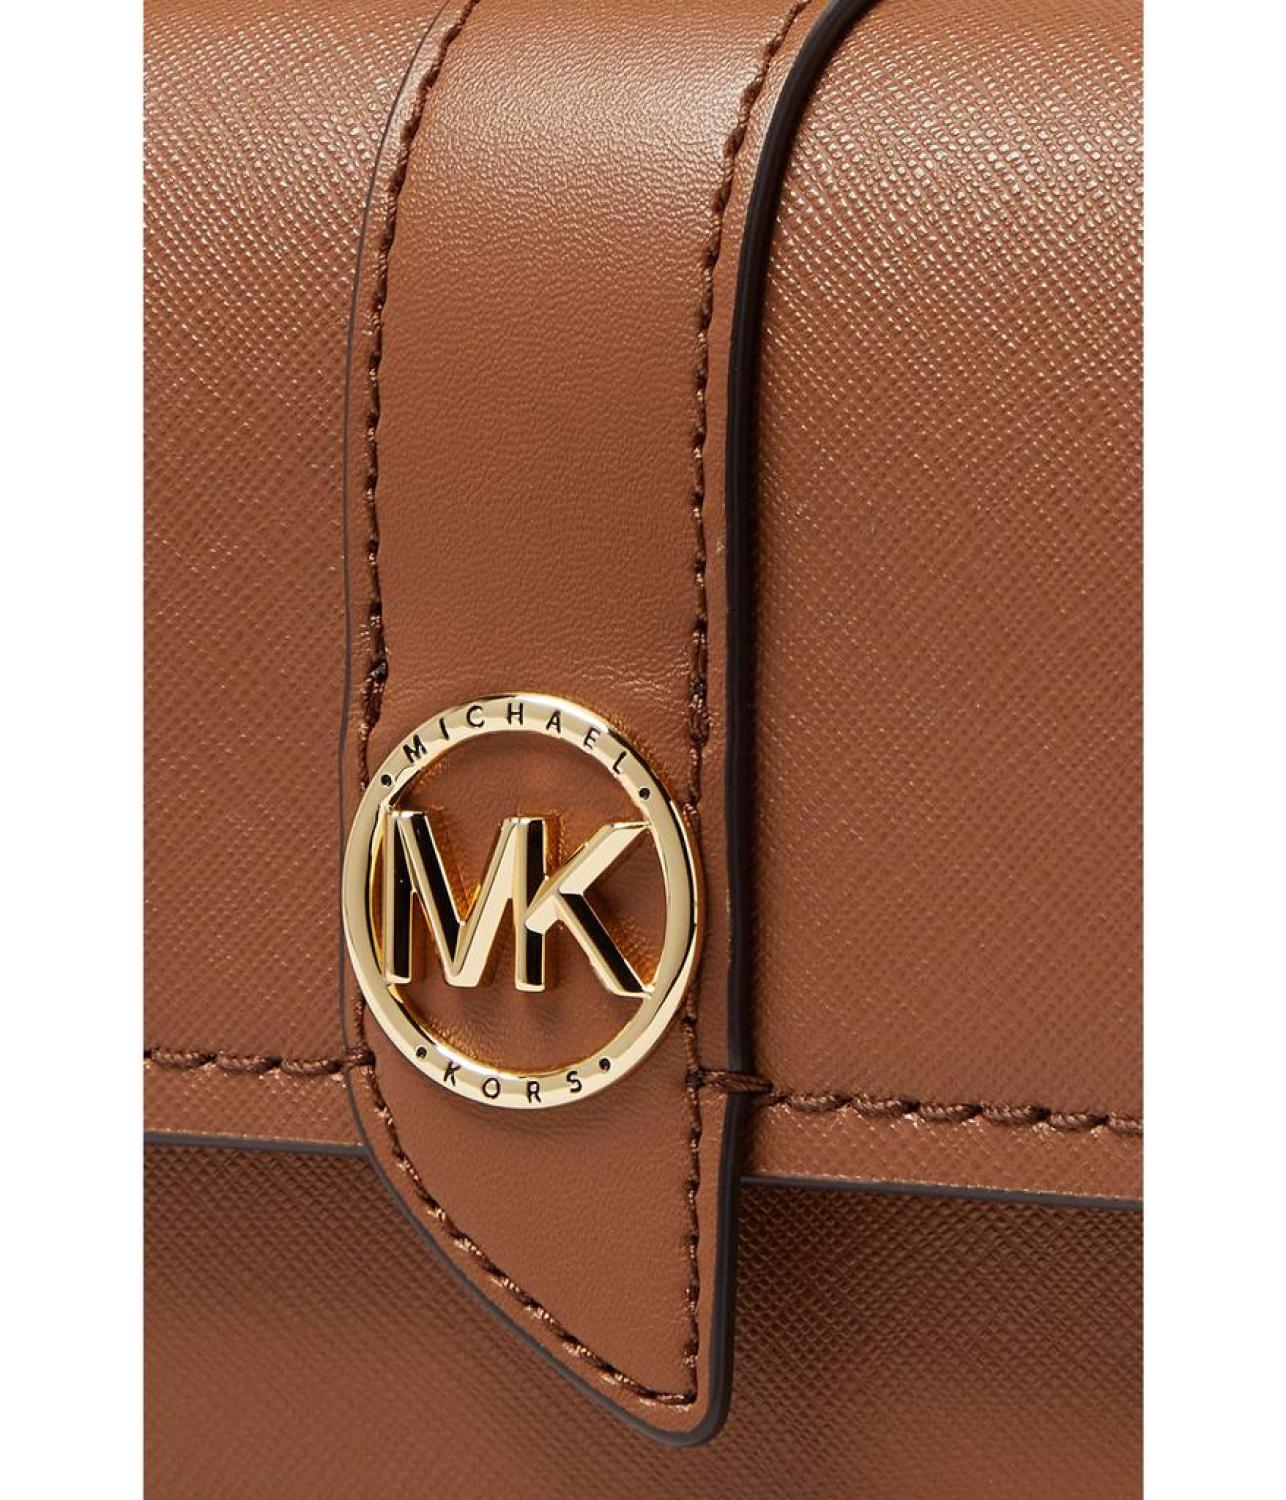 MICHAEL Michael Kors Greenwich Extra Small East/west Sling